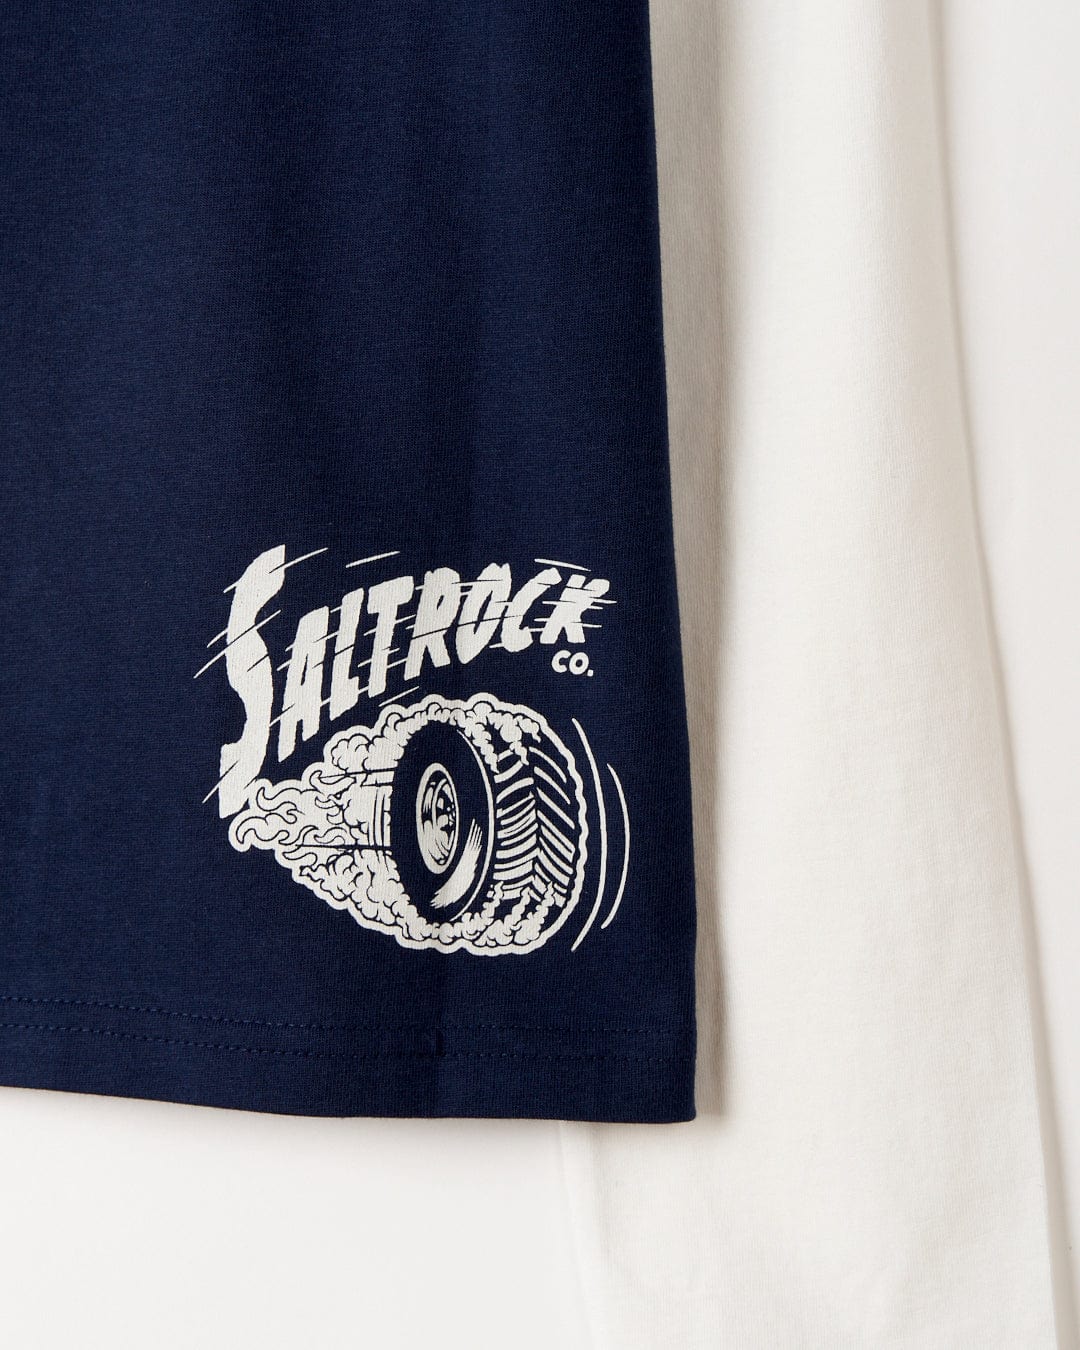 Two No Road No Problem - Kids Long Sleeve T-Shirts, one navy blue and one white, with the hem of the blue shirt displaying a Saltrock Illustration graphic logo.